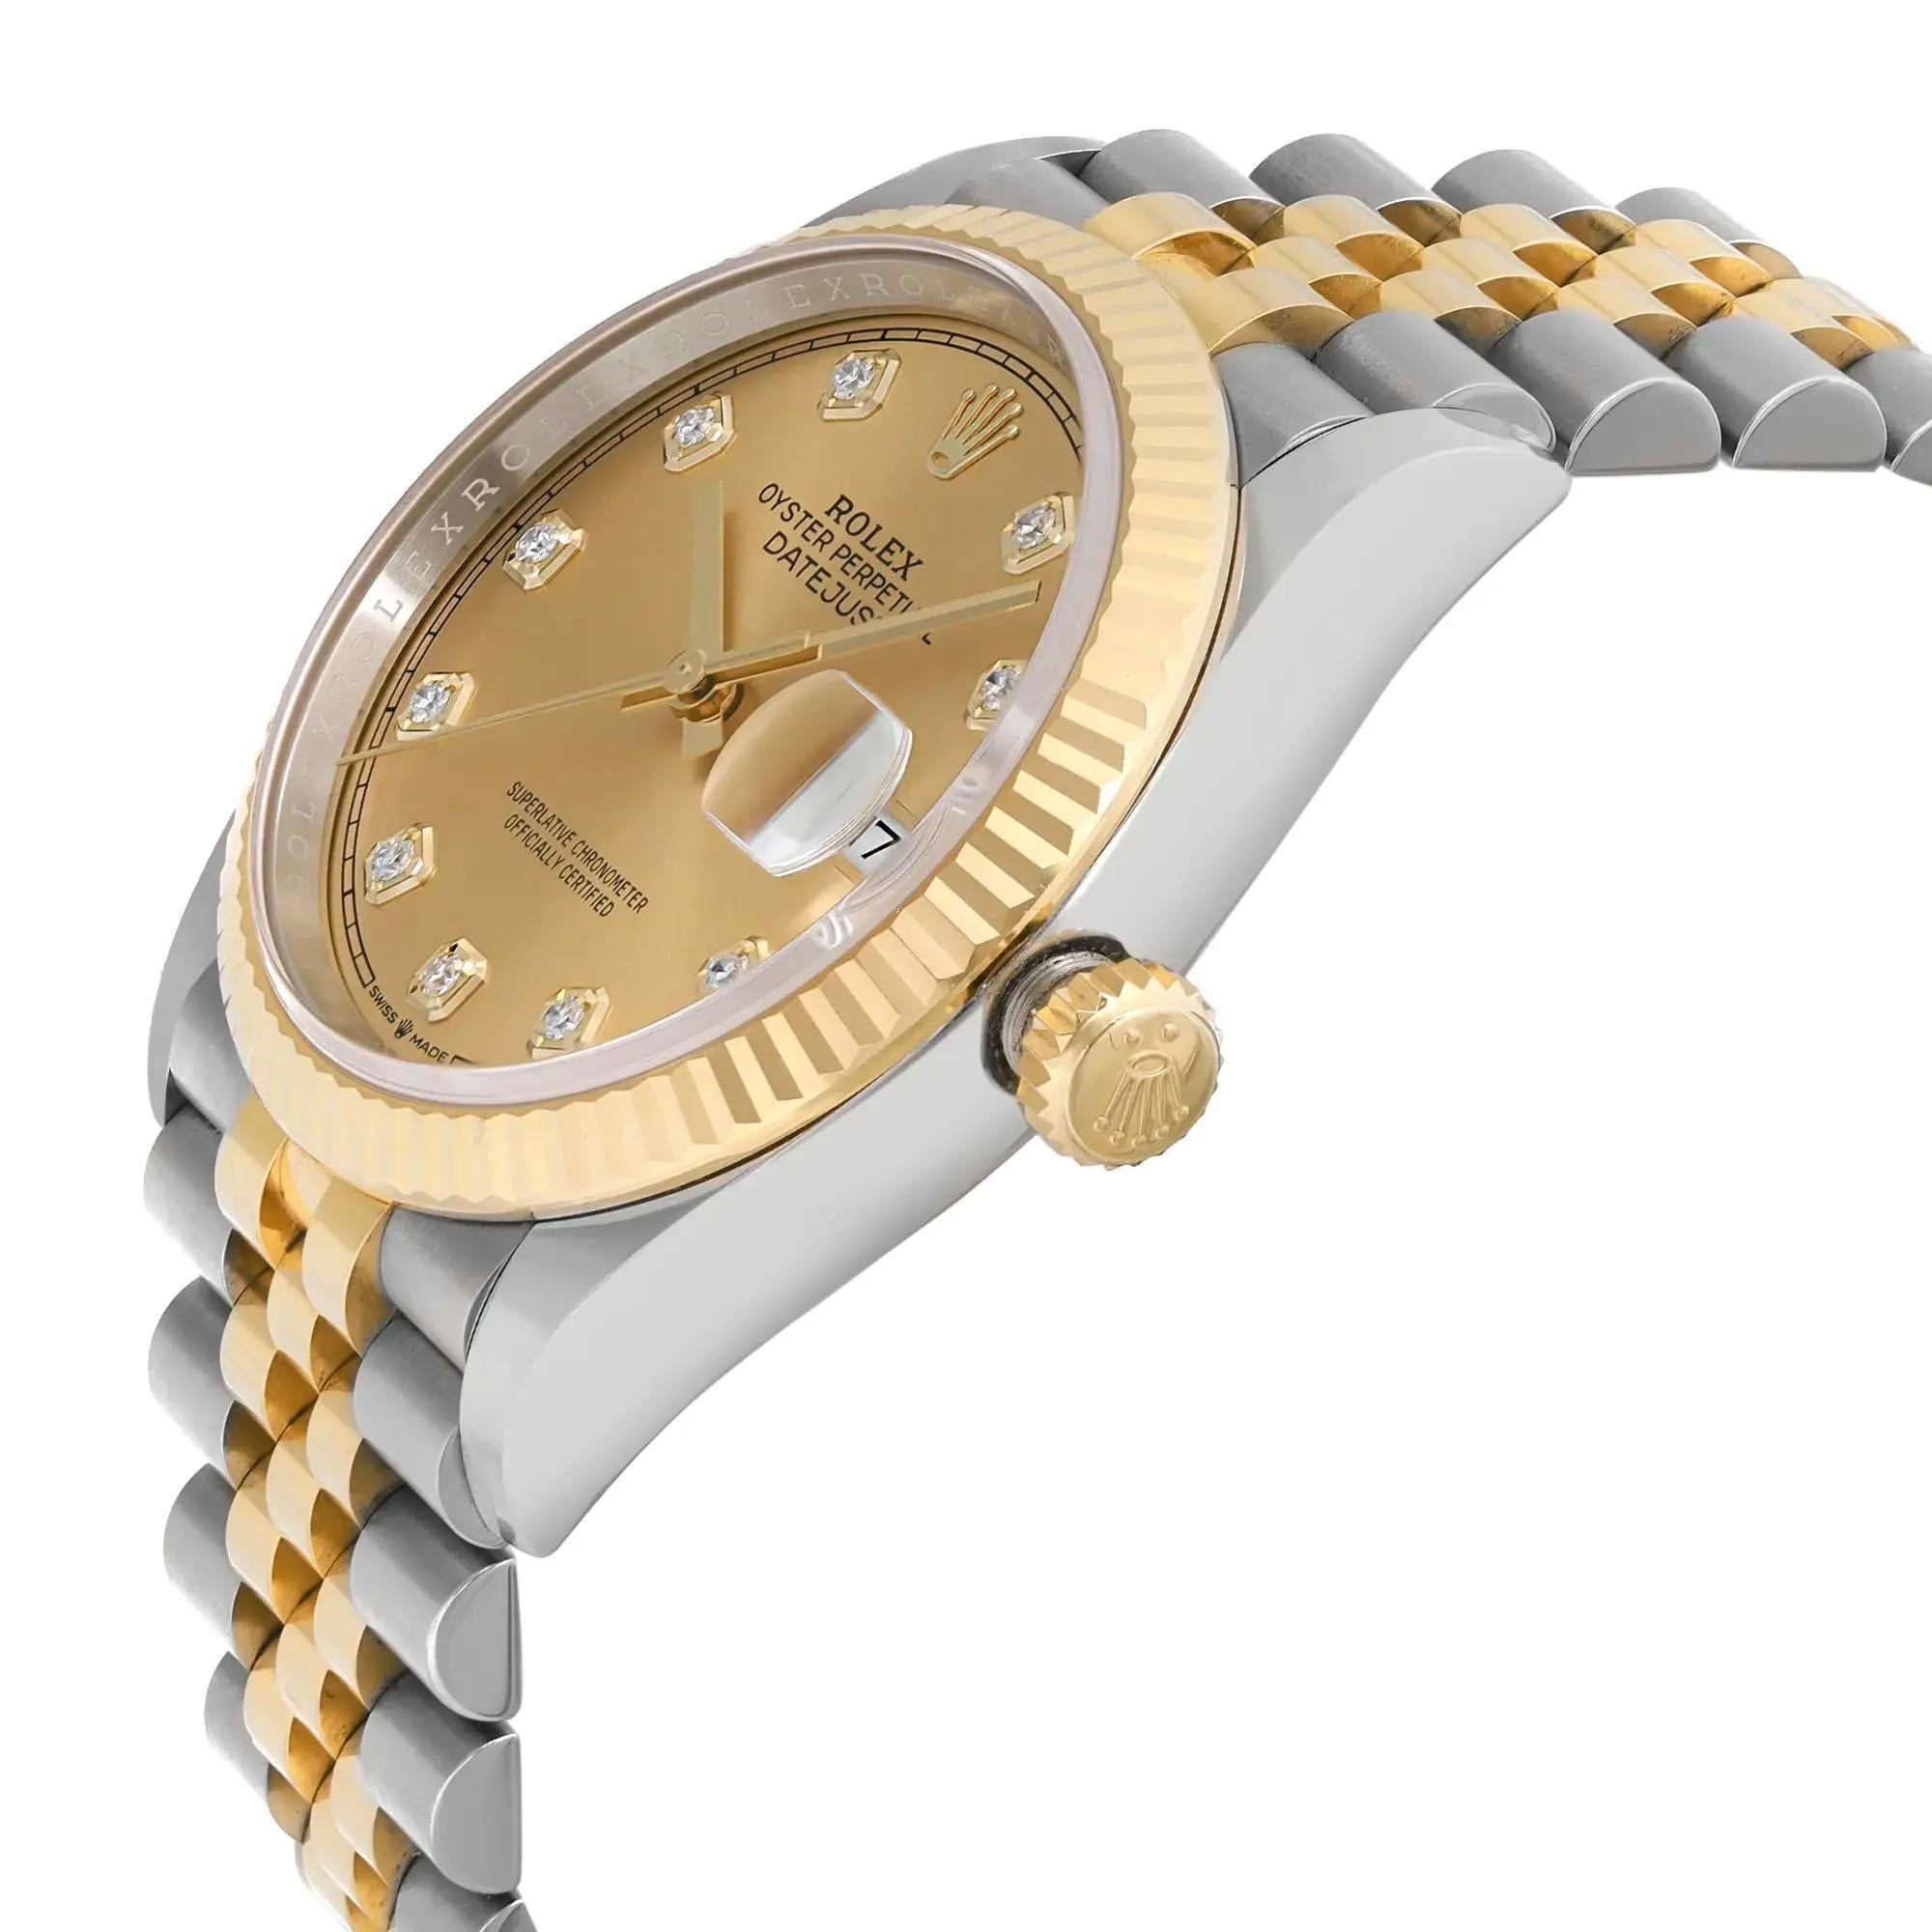 Rolex Datejust 36mm 18K Gold Steel Champagne Diamond Dial Men Watch 126233 In Excellent Condition For Sale In New York, NY